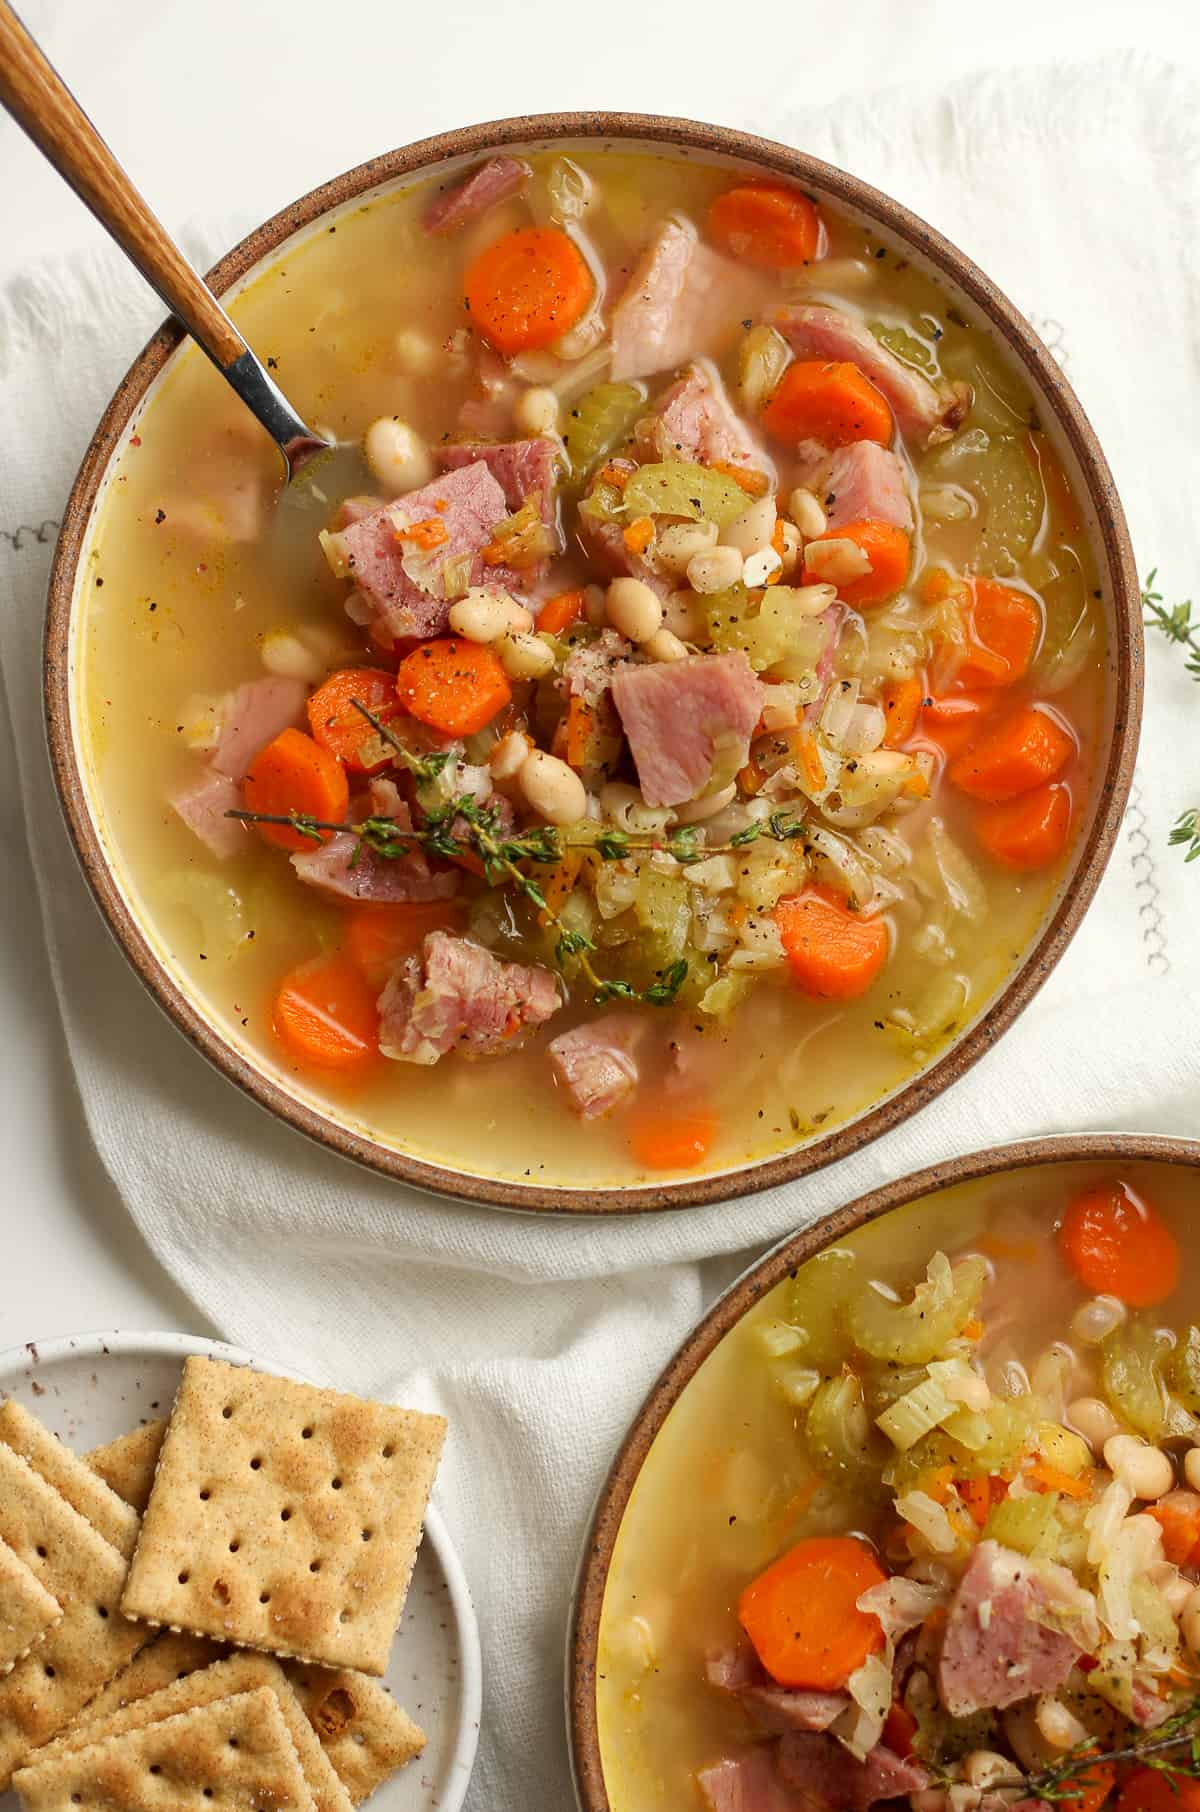 Two bowls of the ham and bean soup.